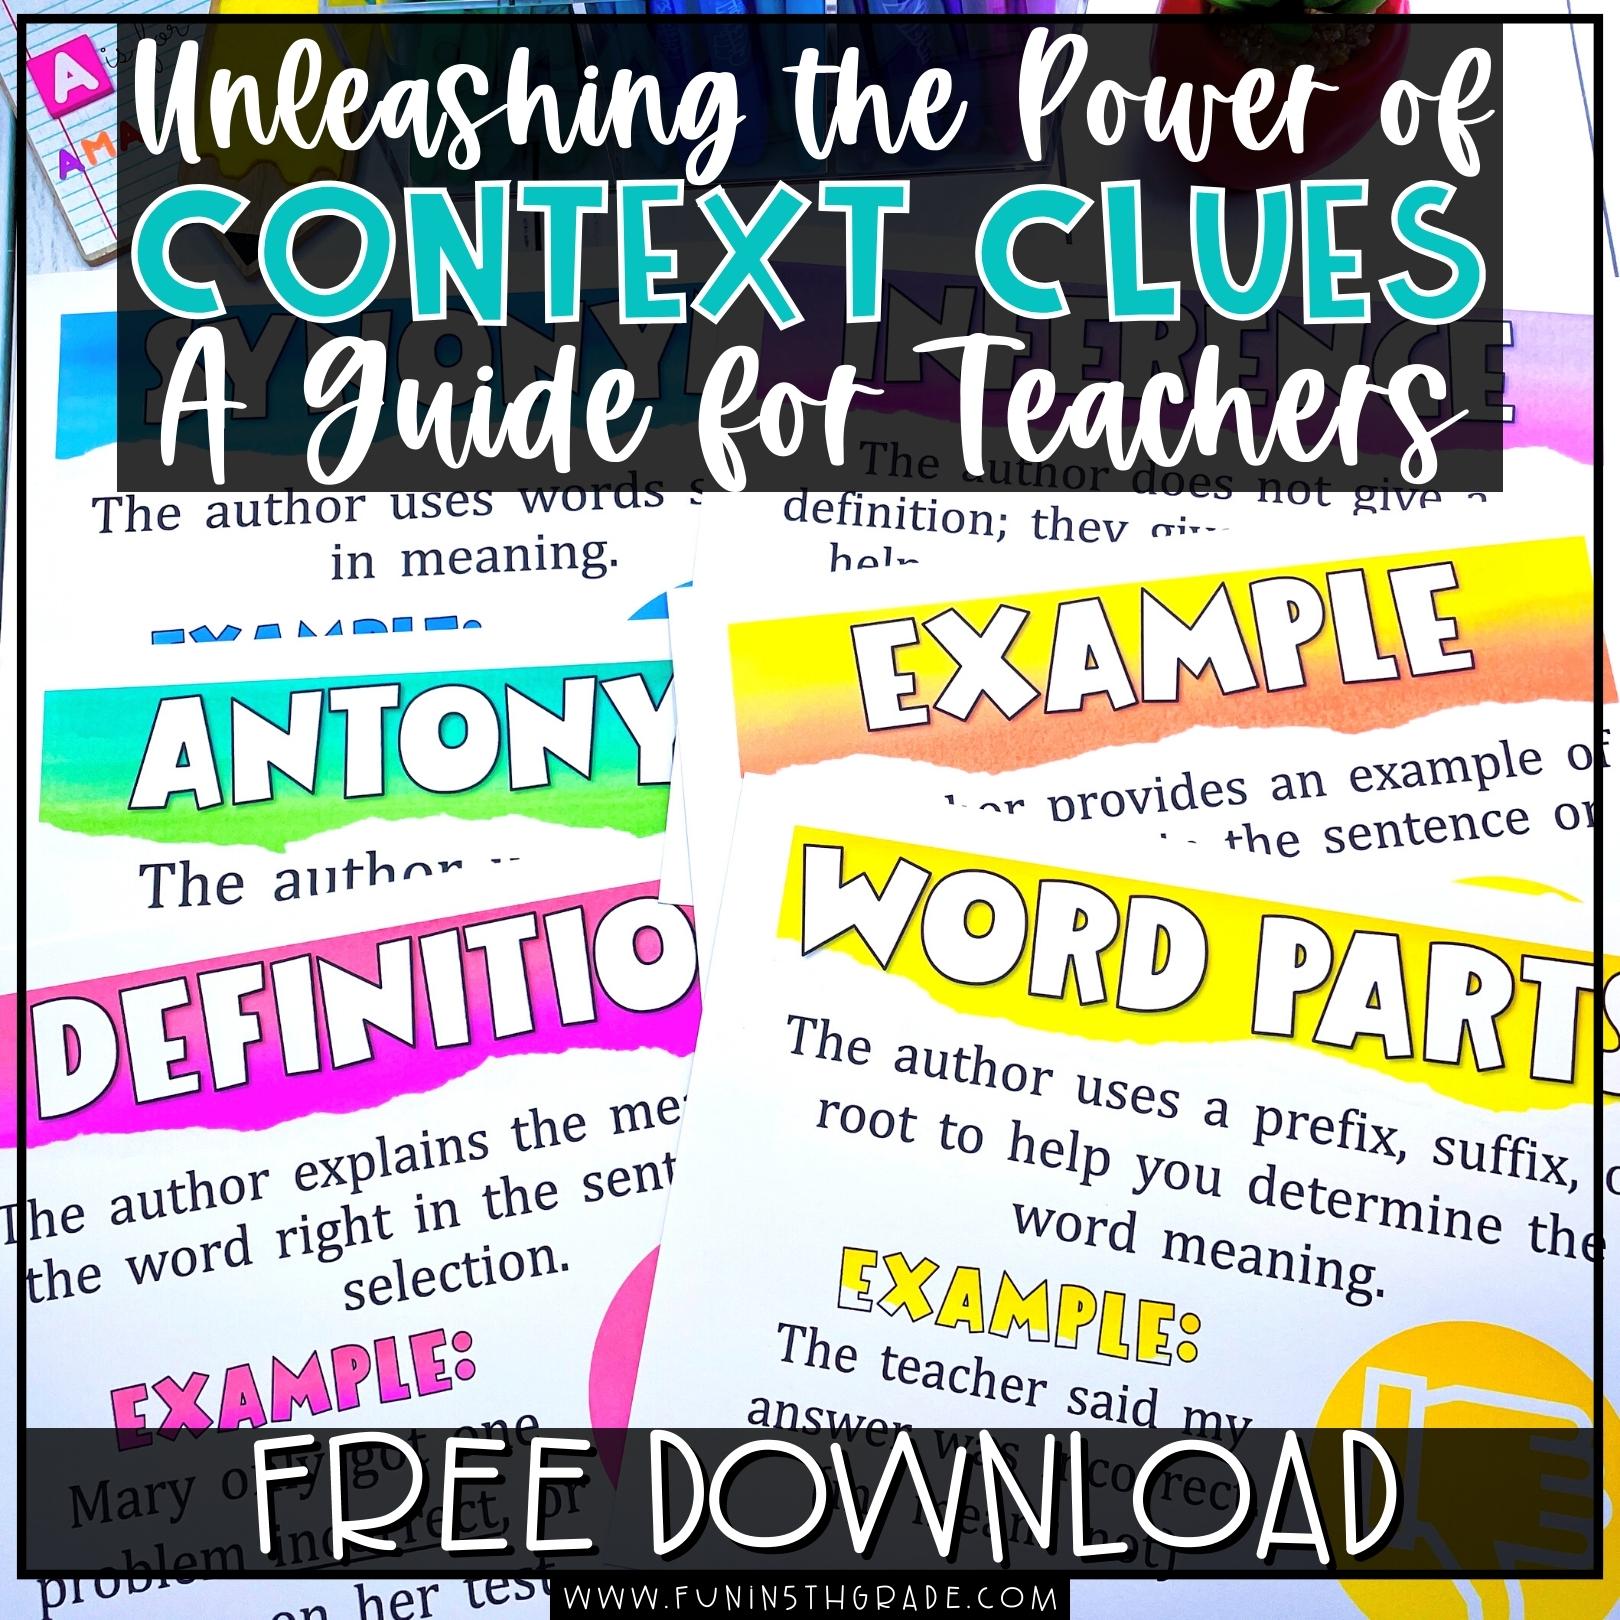 Unleashing the Power of Context Clues: A Guide for Upper Elementary Teachers Blog Image